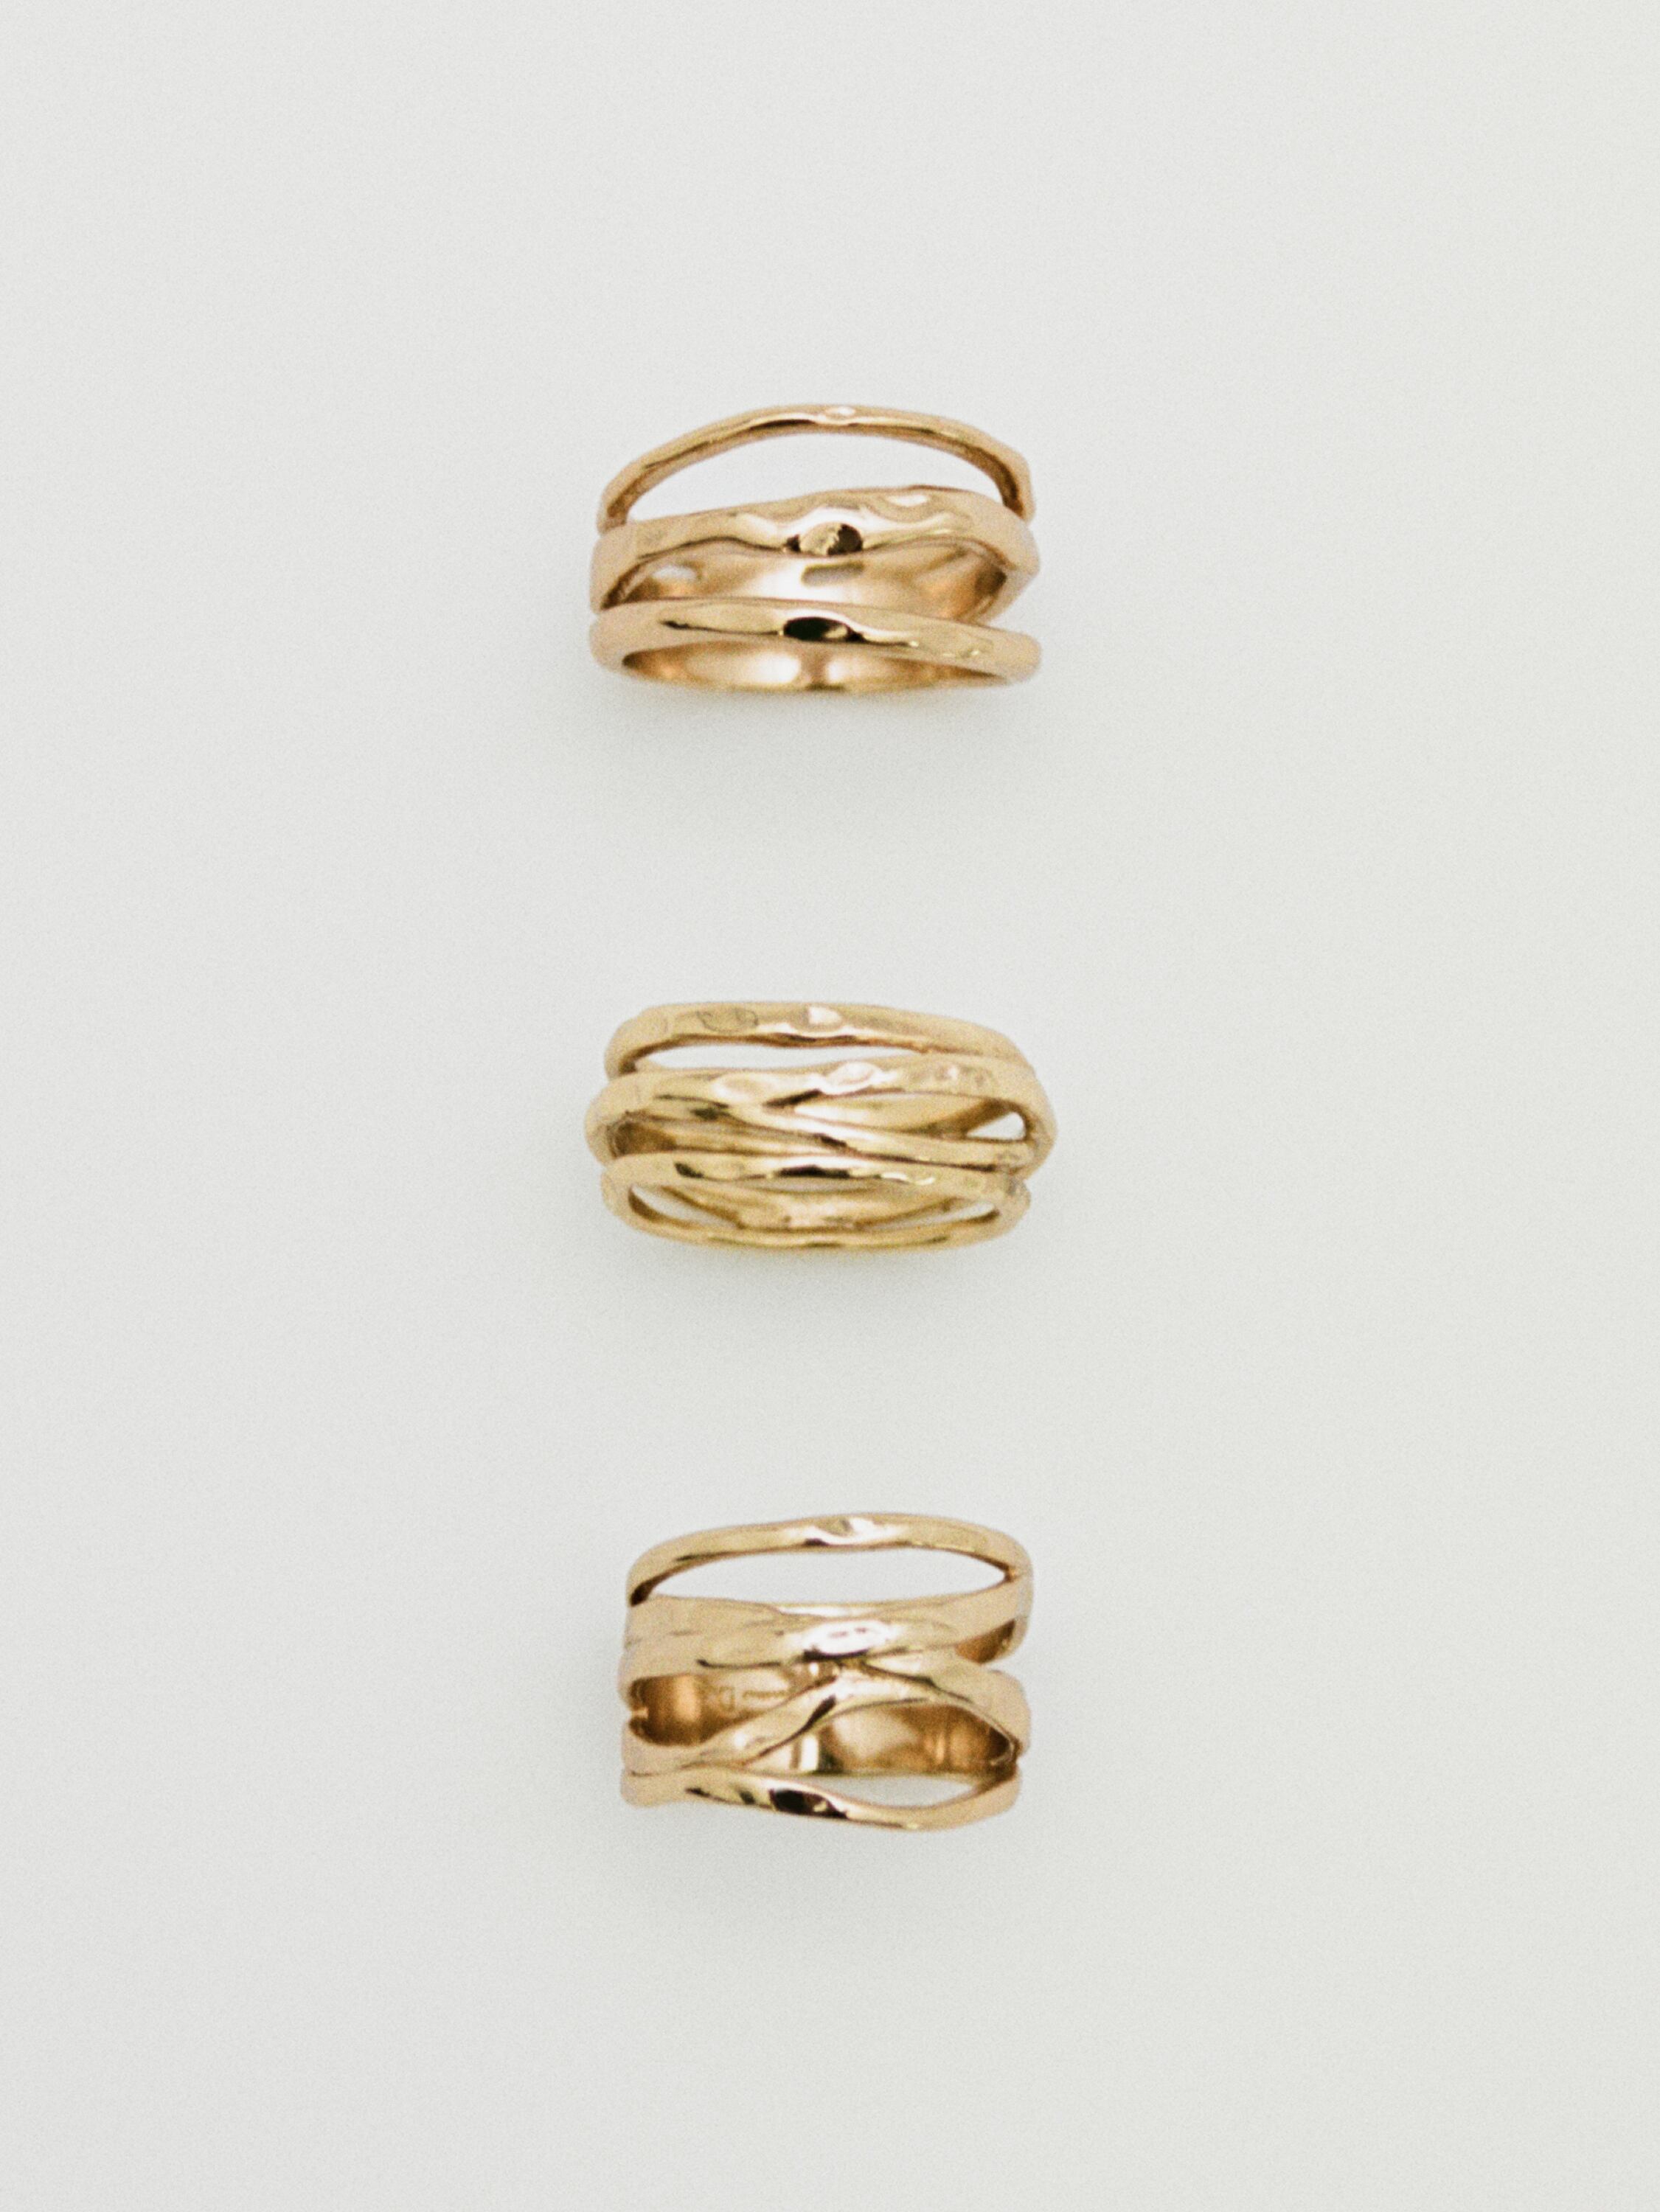 Pack of gold-plated minimalist rings